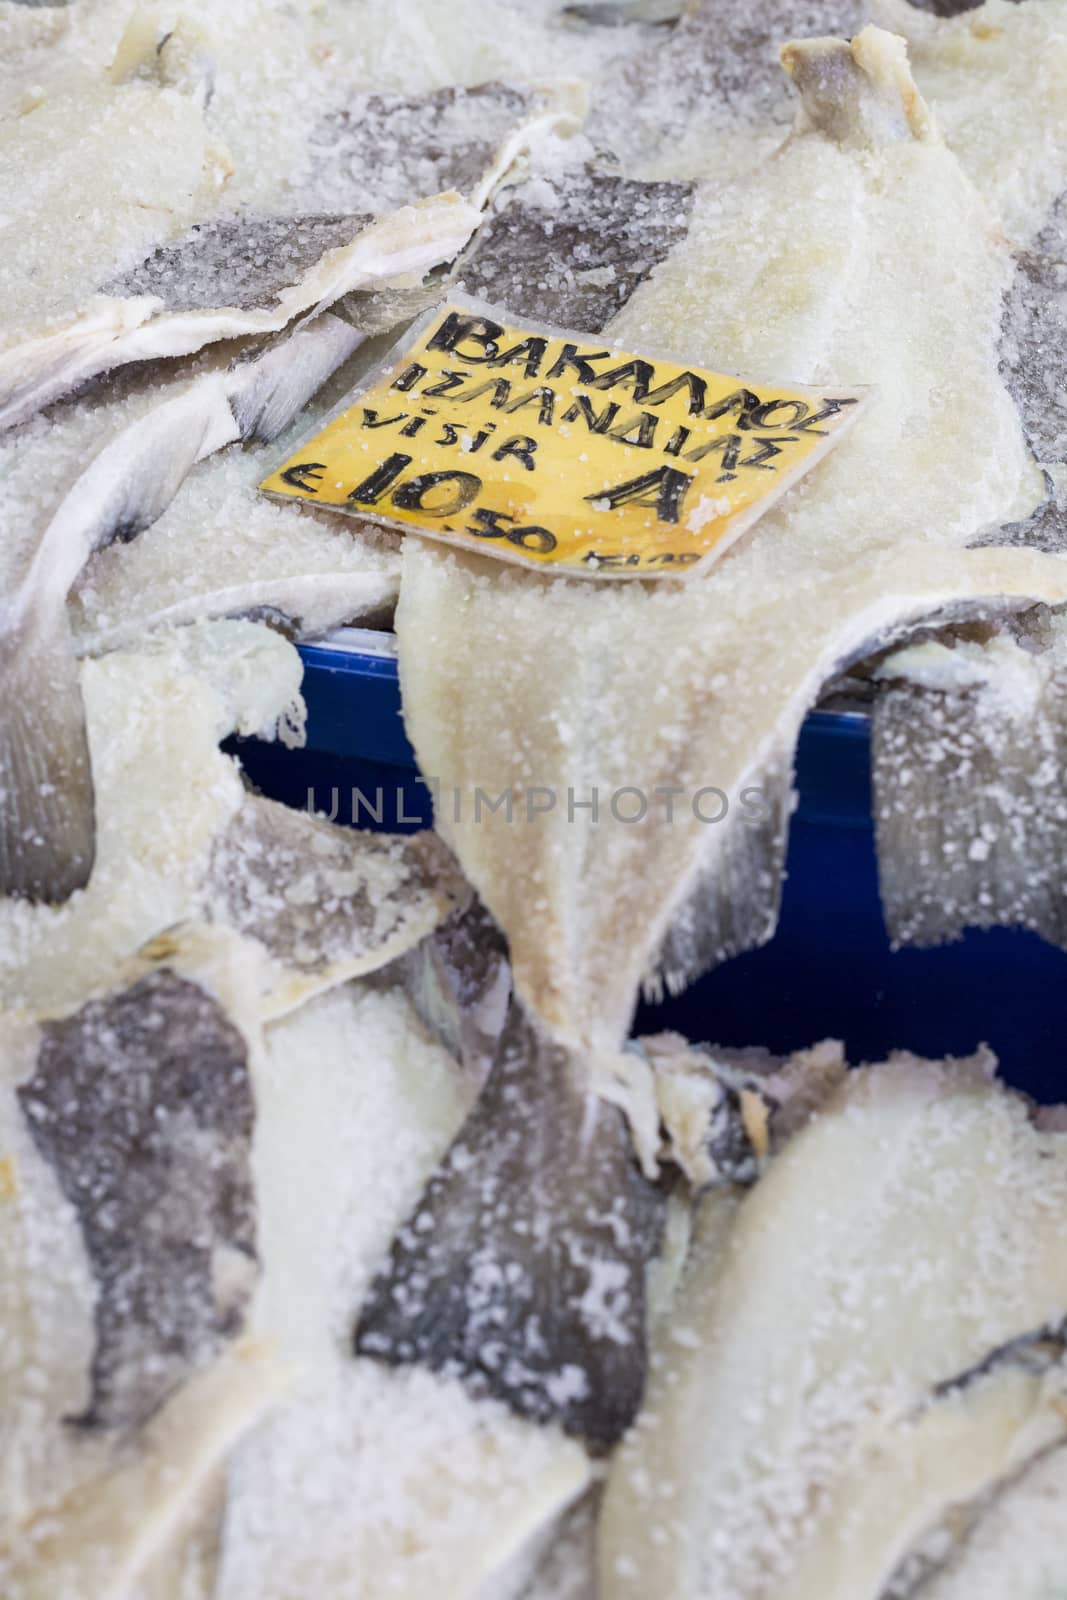 Salted Cod fish Bacalao on the market, Greece.